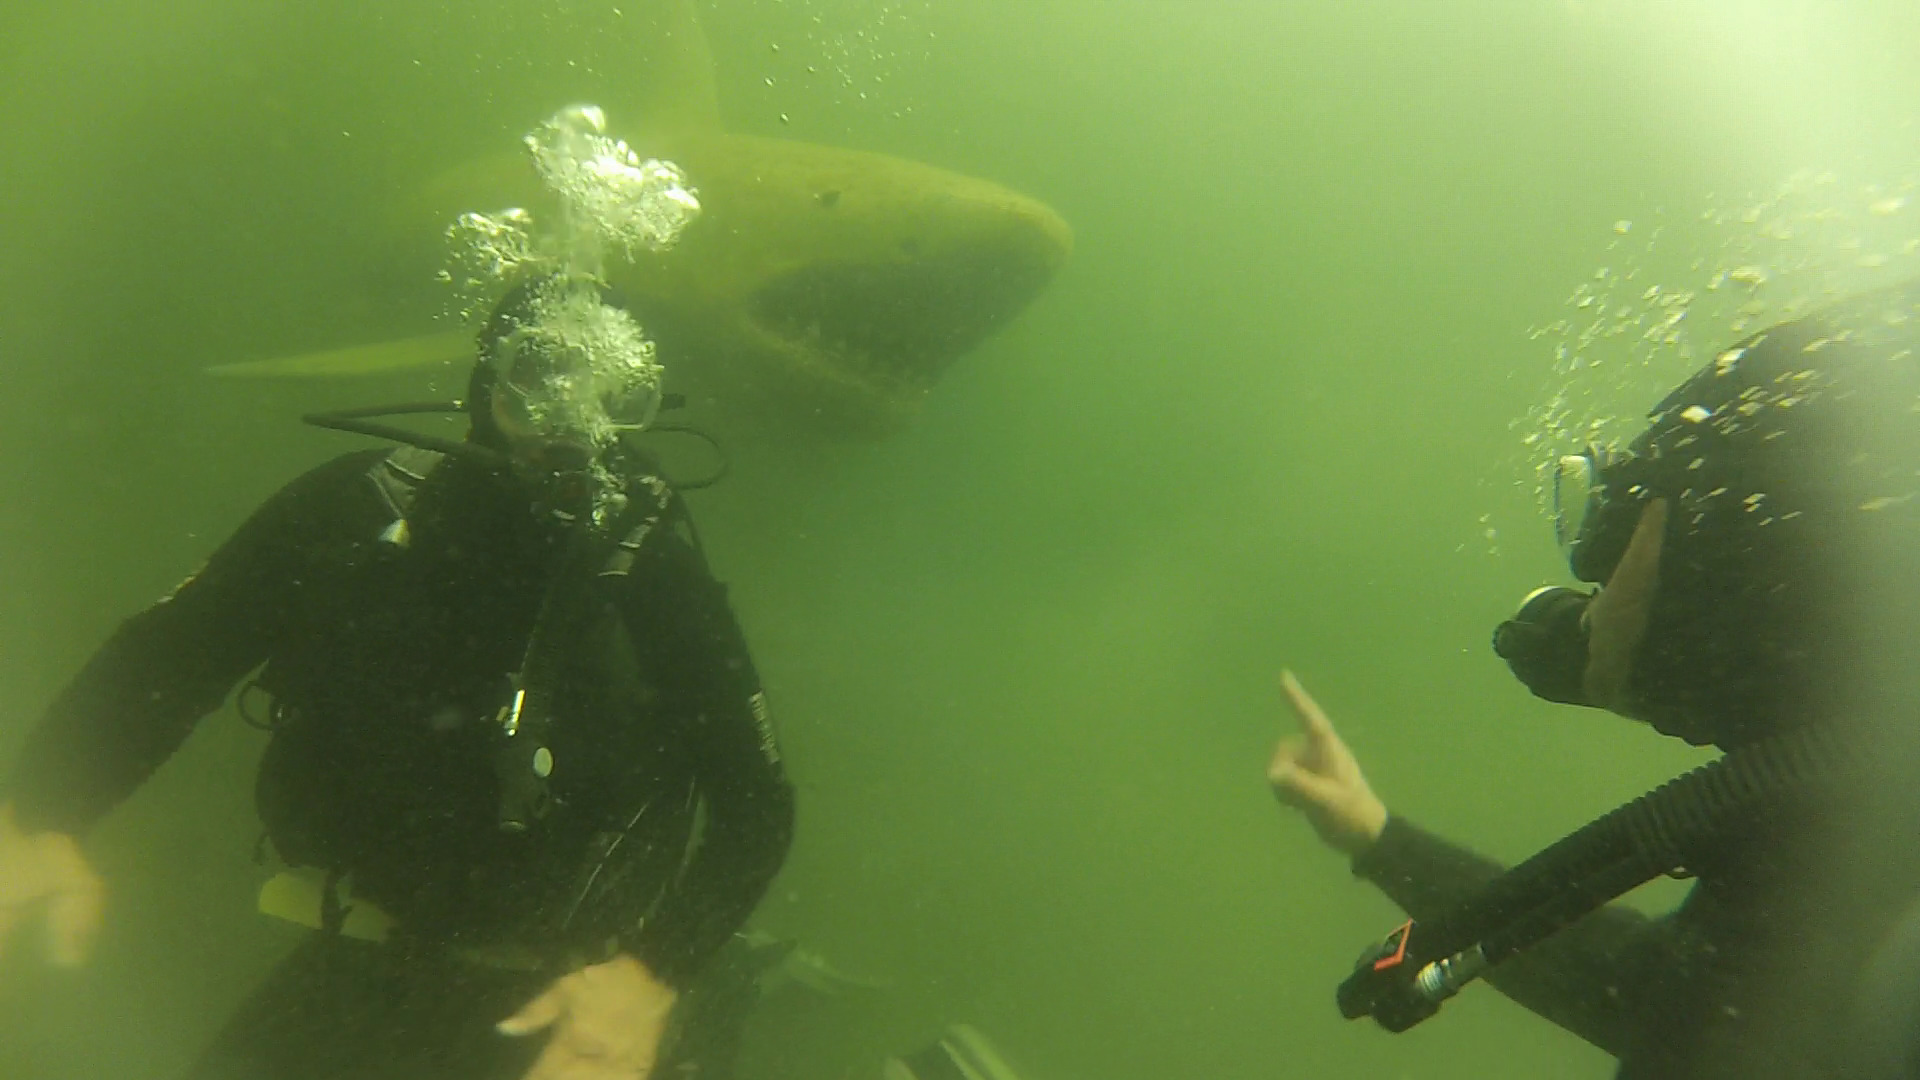 Two scuba divers underwater near a fake shark.